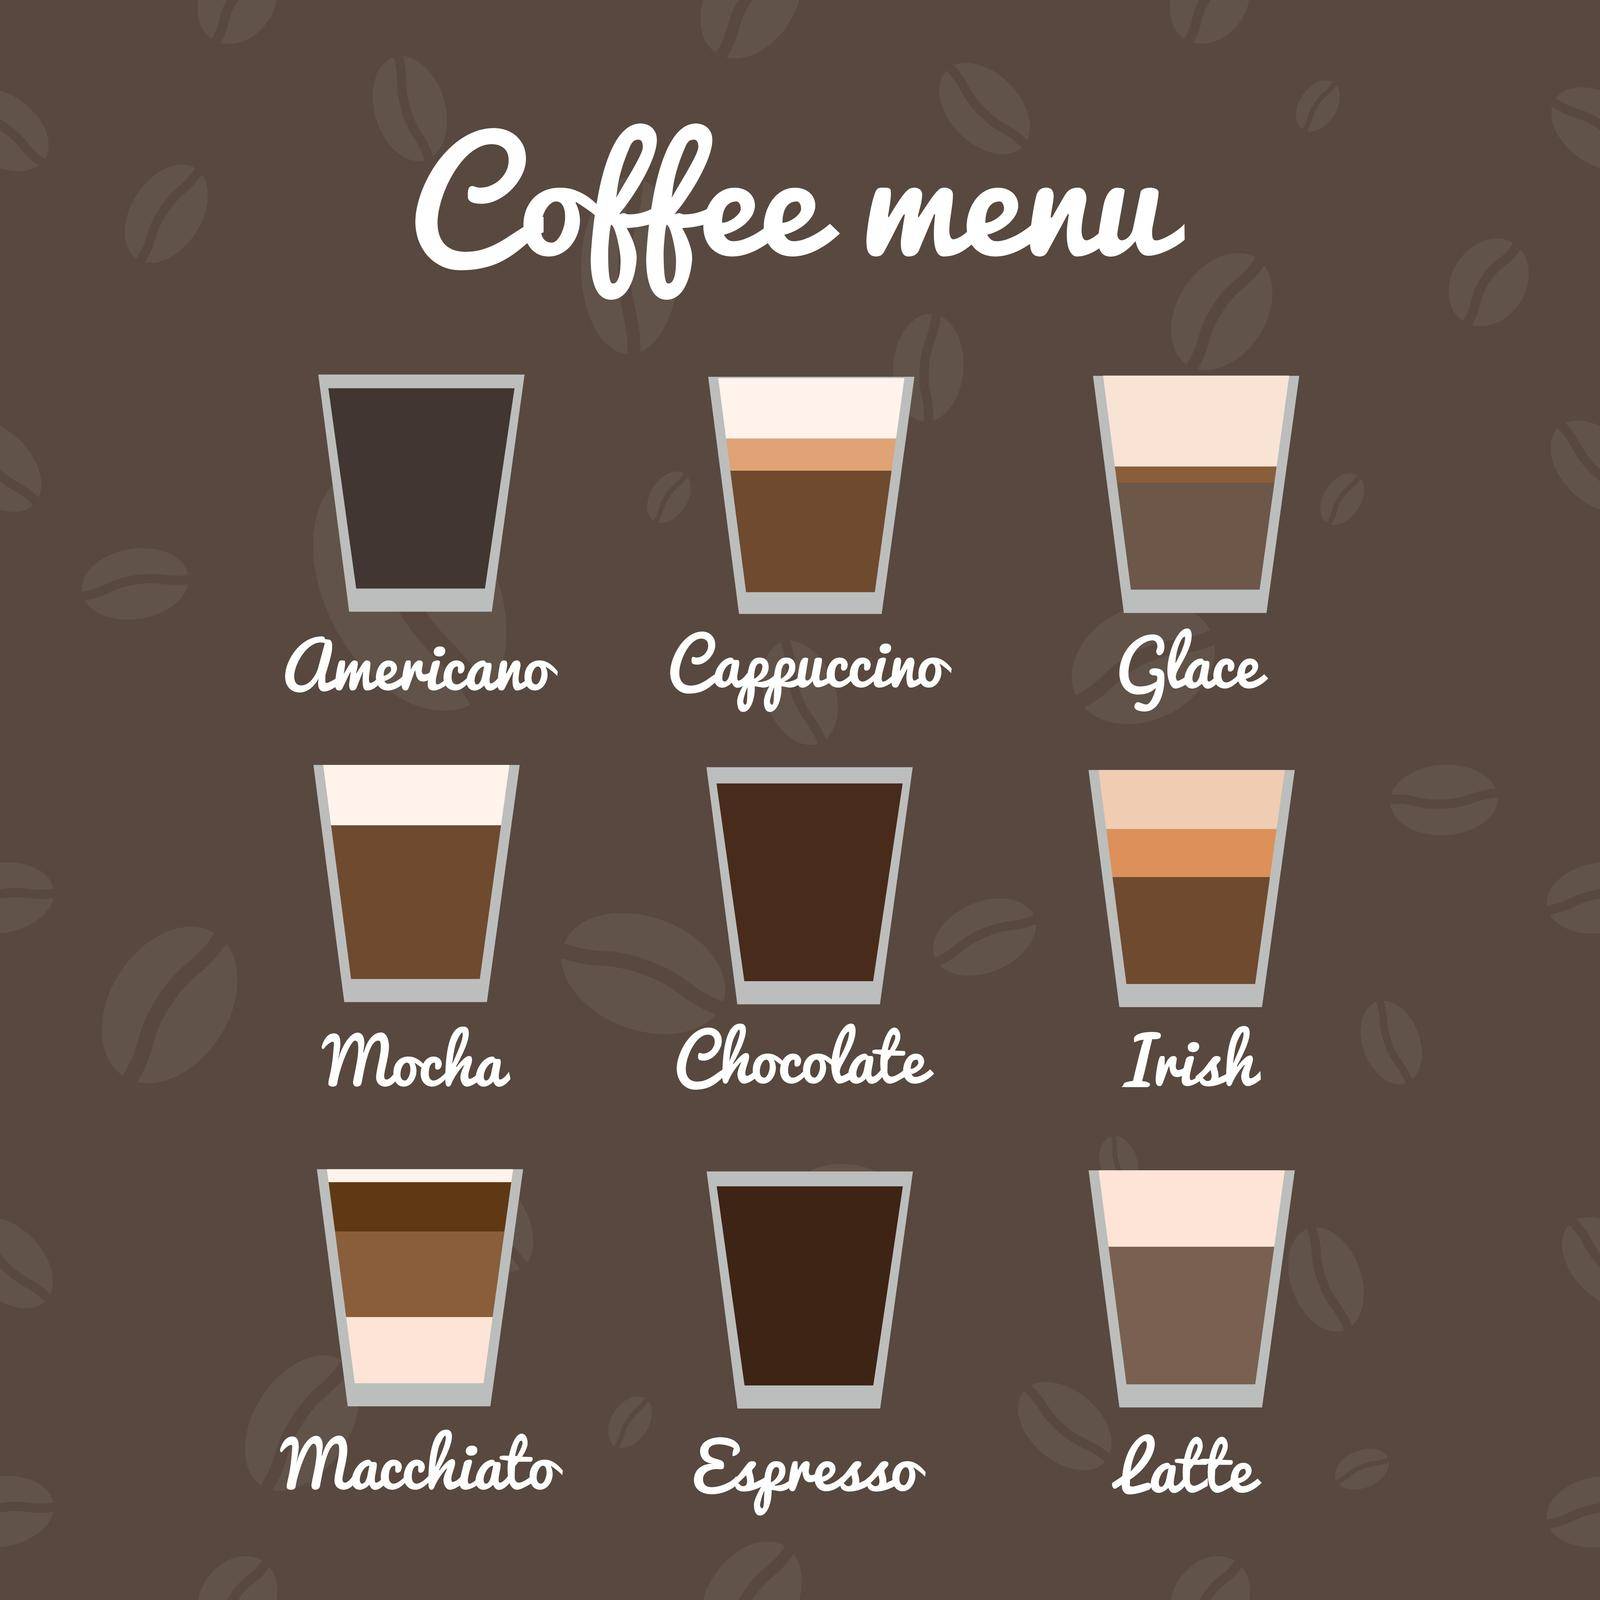 Coffee menu on seamless background with beans.